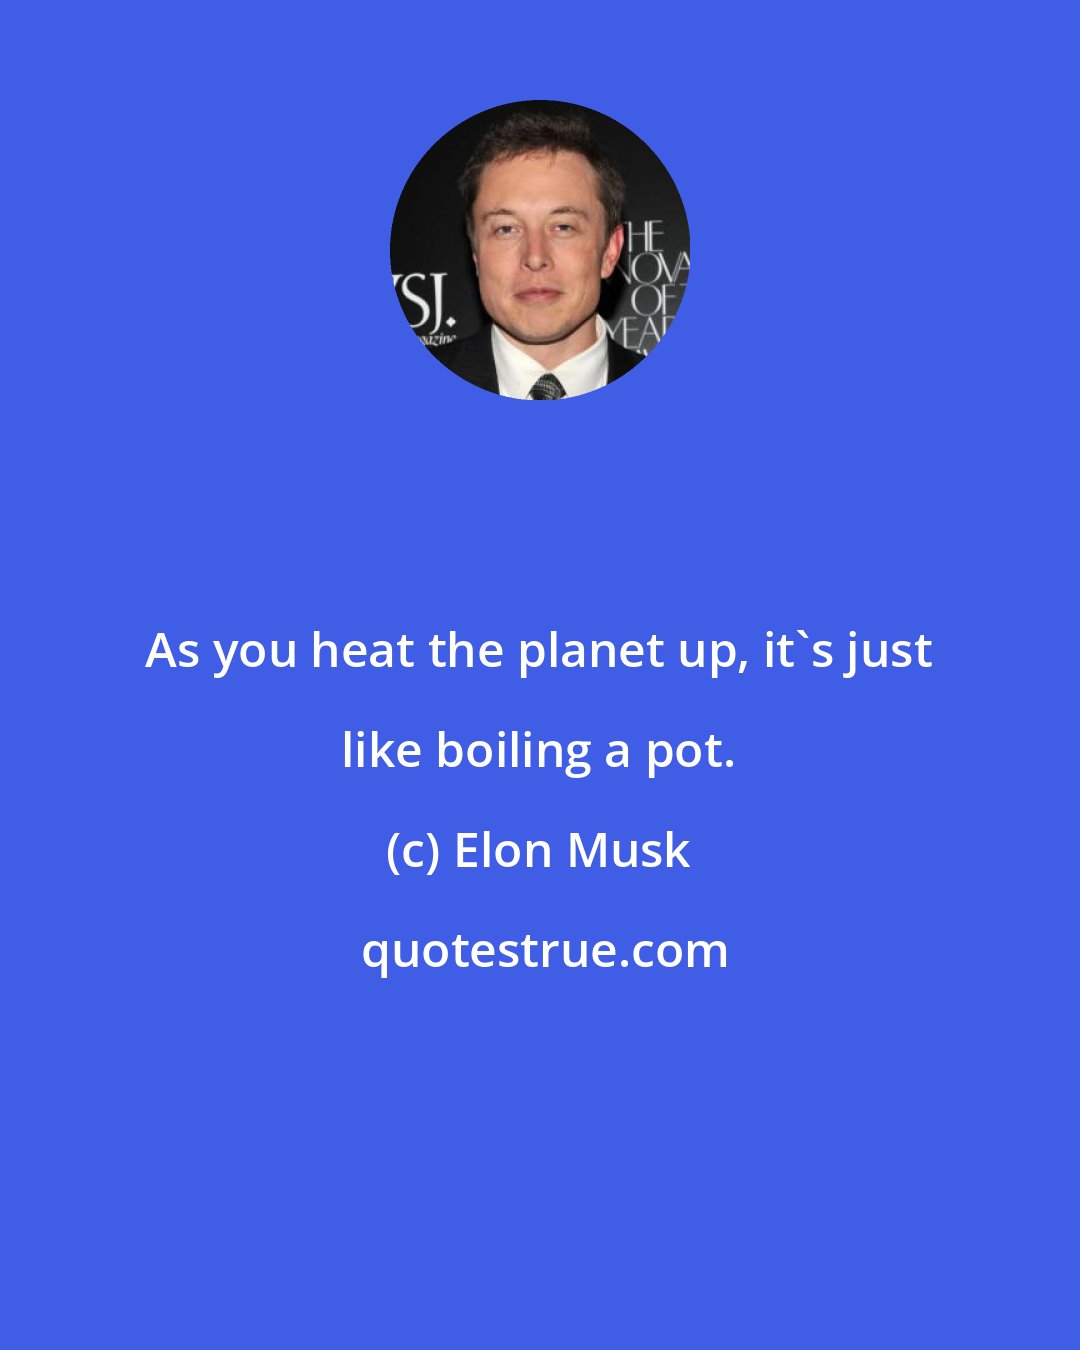 Elon Musk: As you heat the planet up, it's just like boiling a pot.